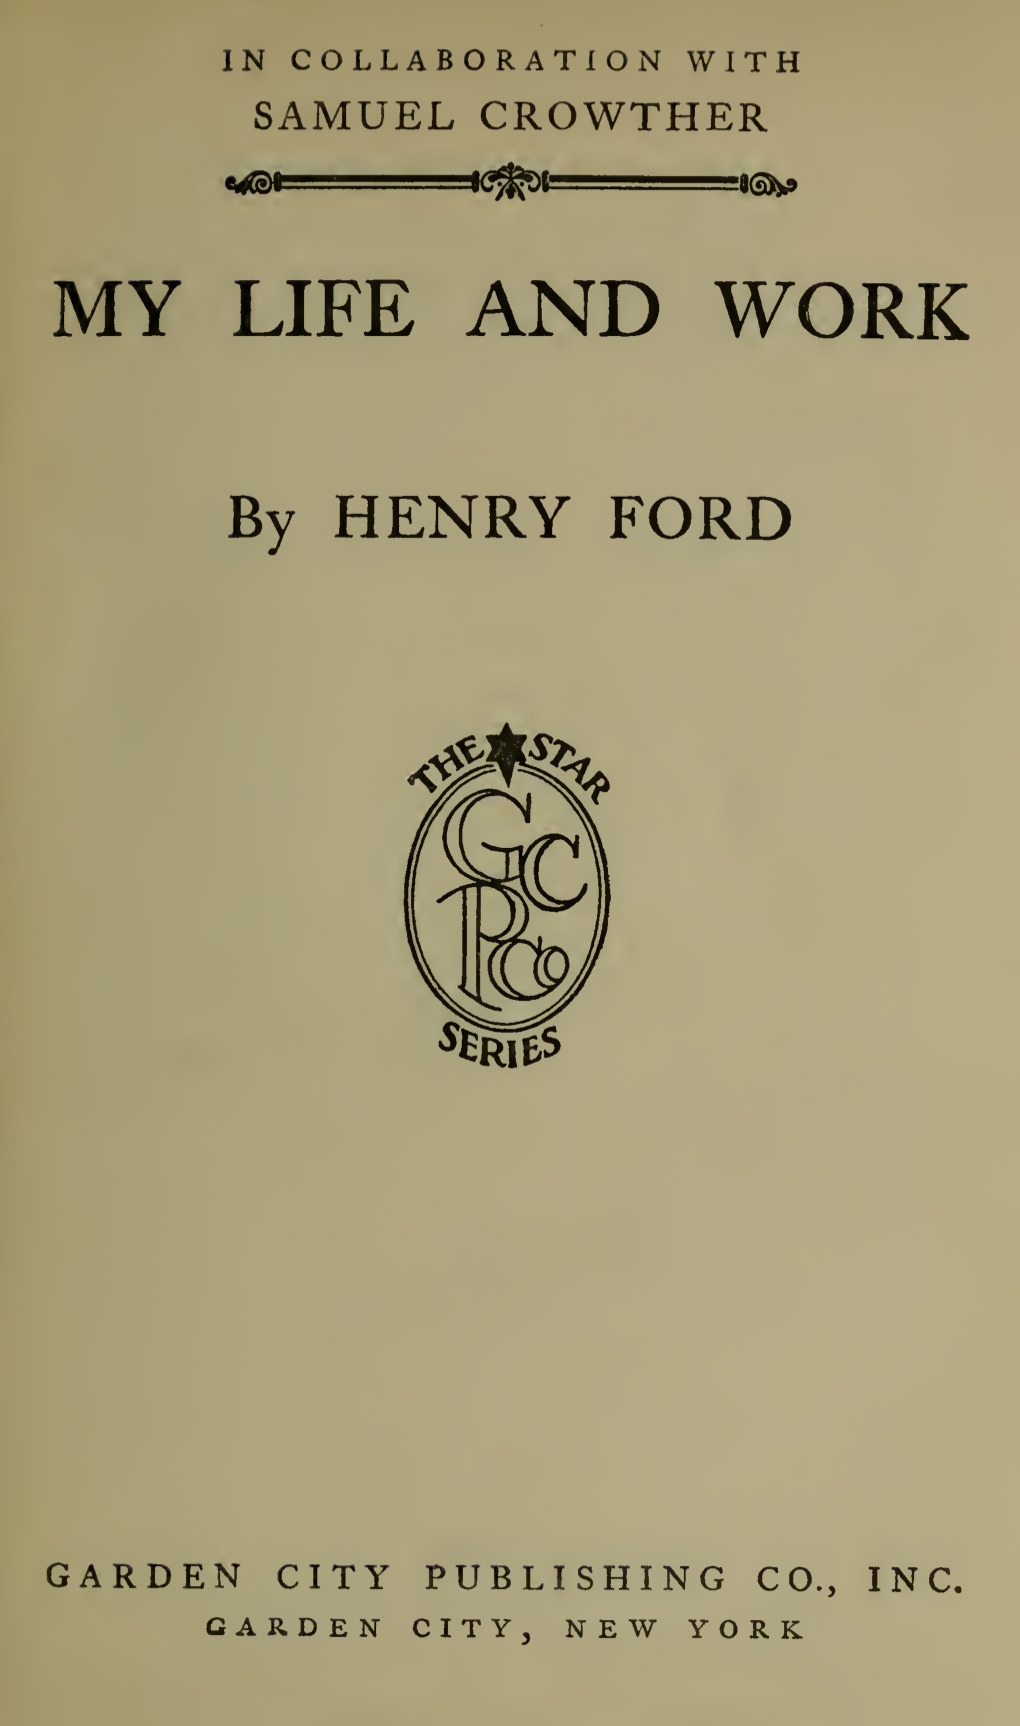 My Life and Work (1922) by Henry Ford